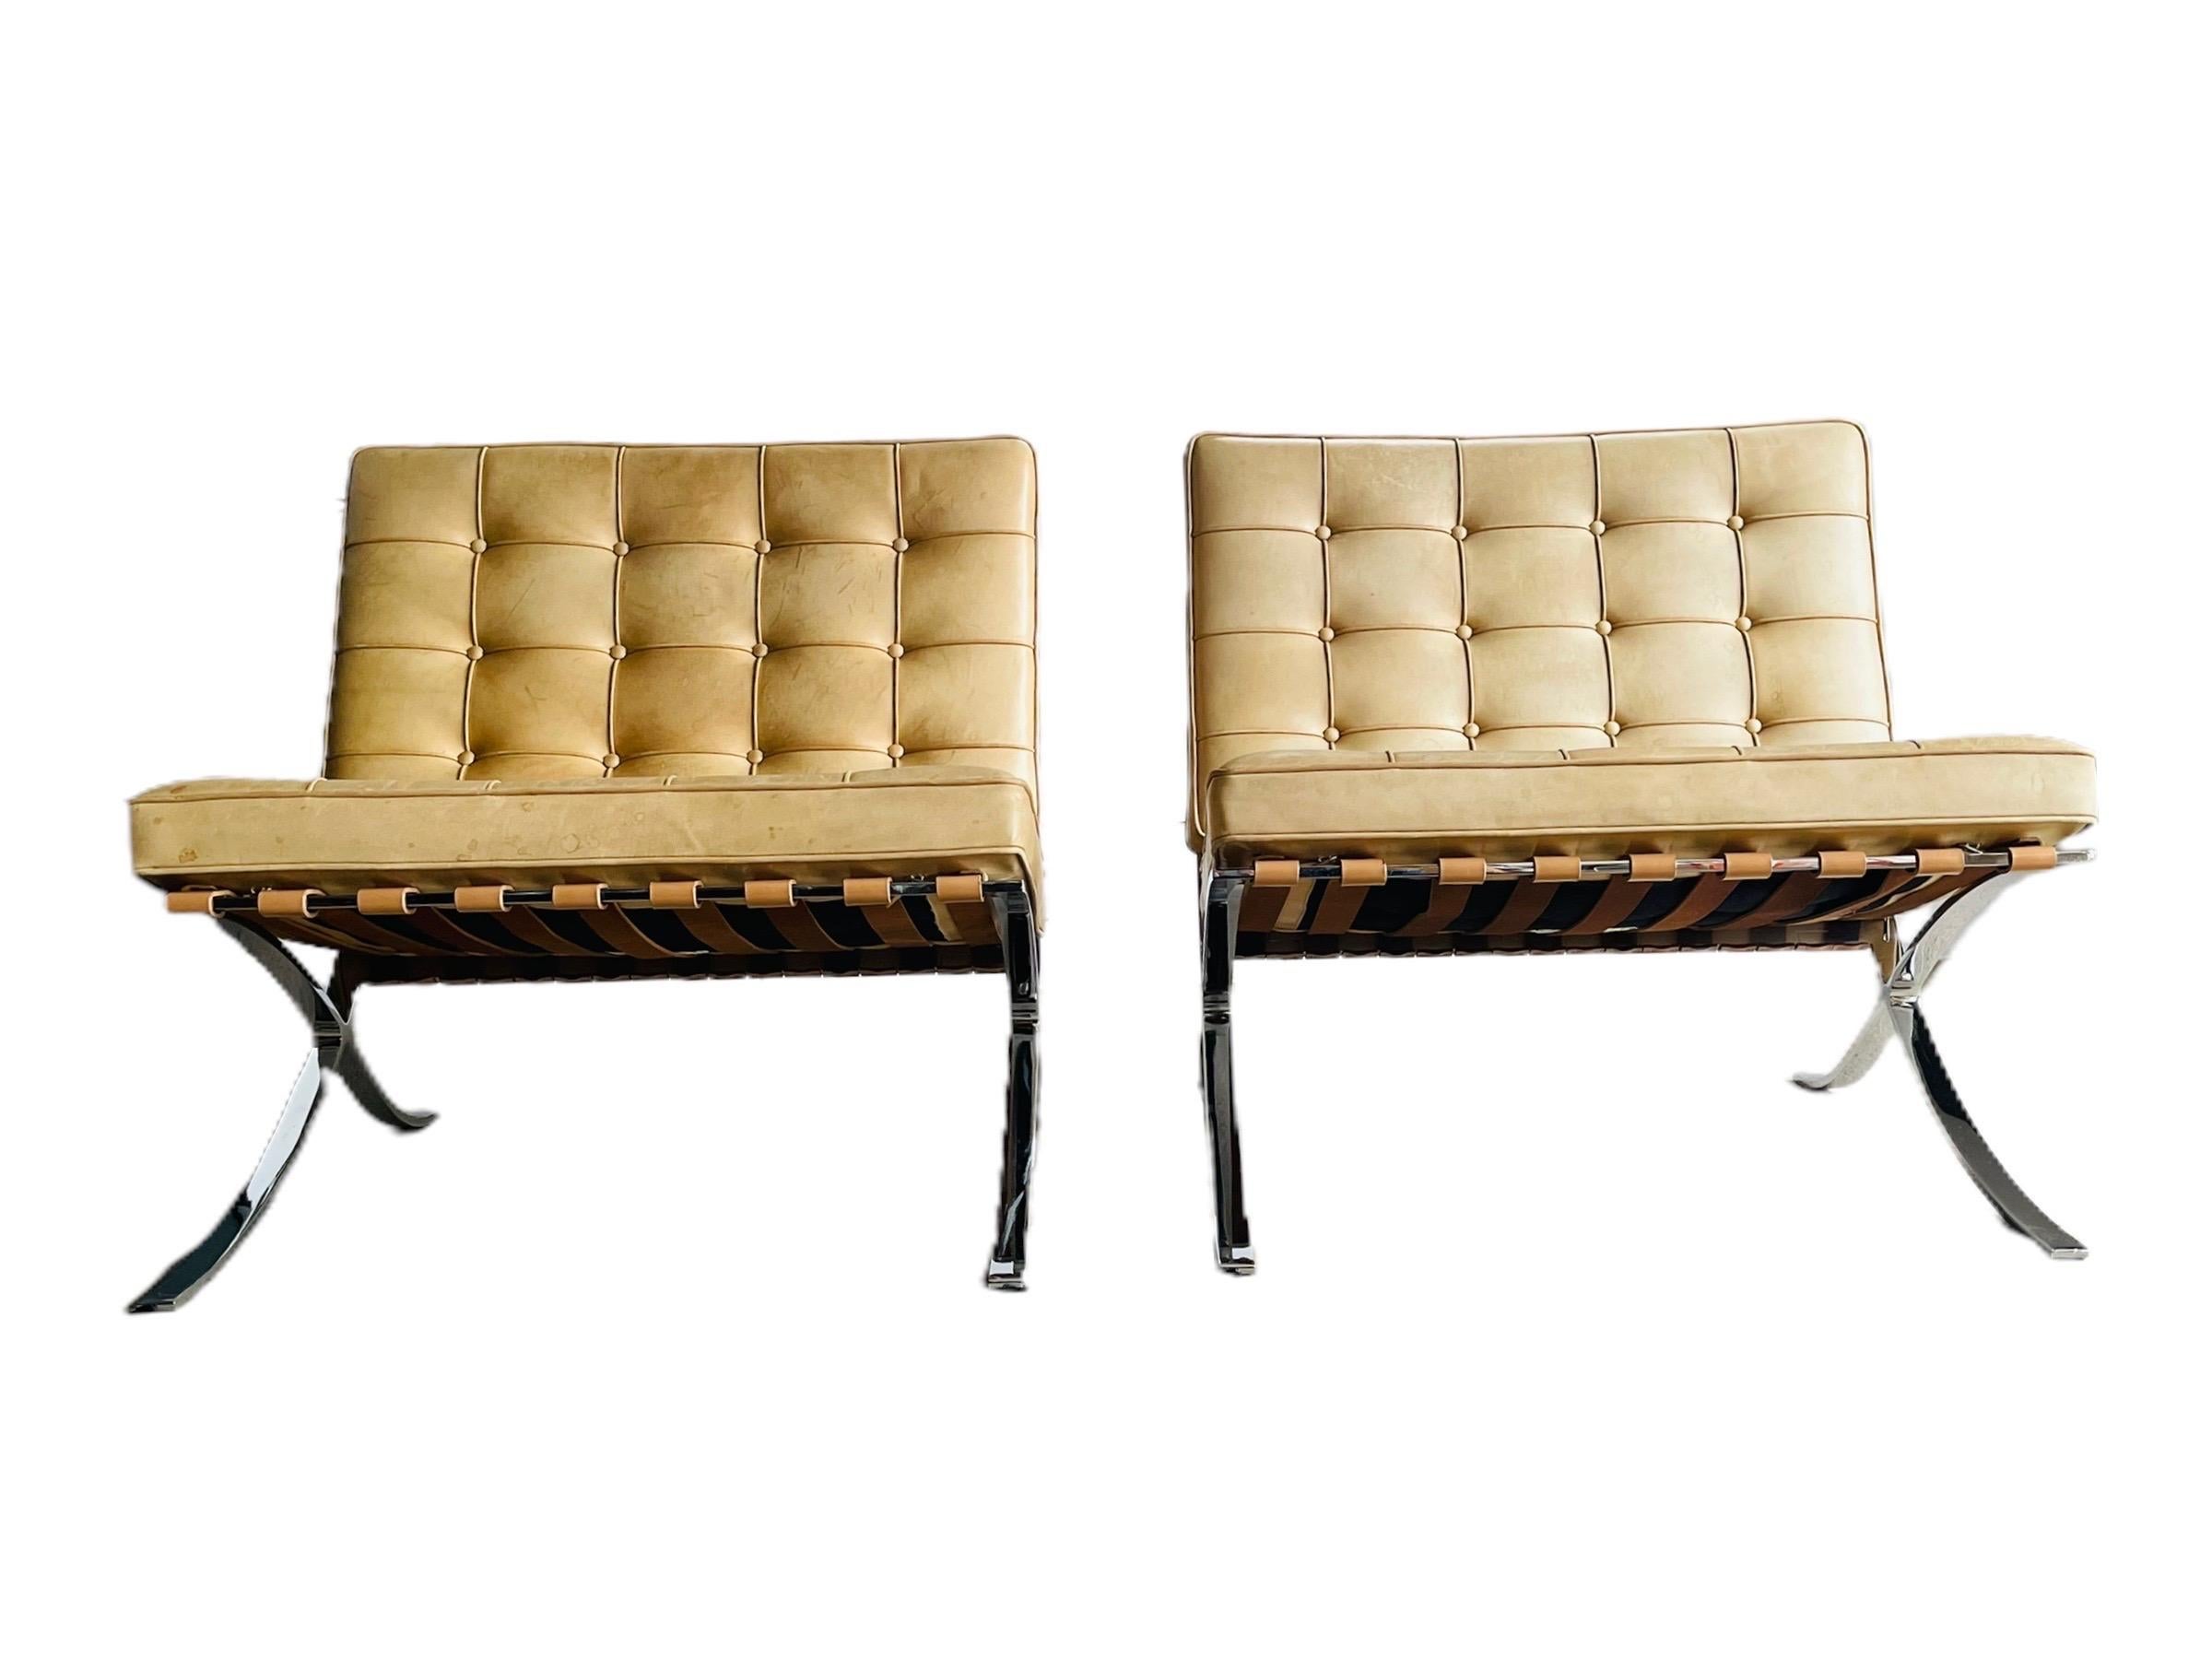 Exceptional and iconic split frame pair of Barcelona chairs designed by Ludwig Mies Van Der Rohe for Knoll Studio International in the most desirable tan/cream leather. The leather is nicely worn and has a nice patina. Both the cushions and the